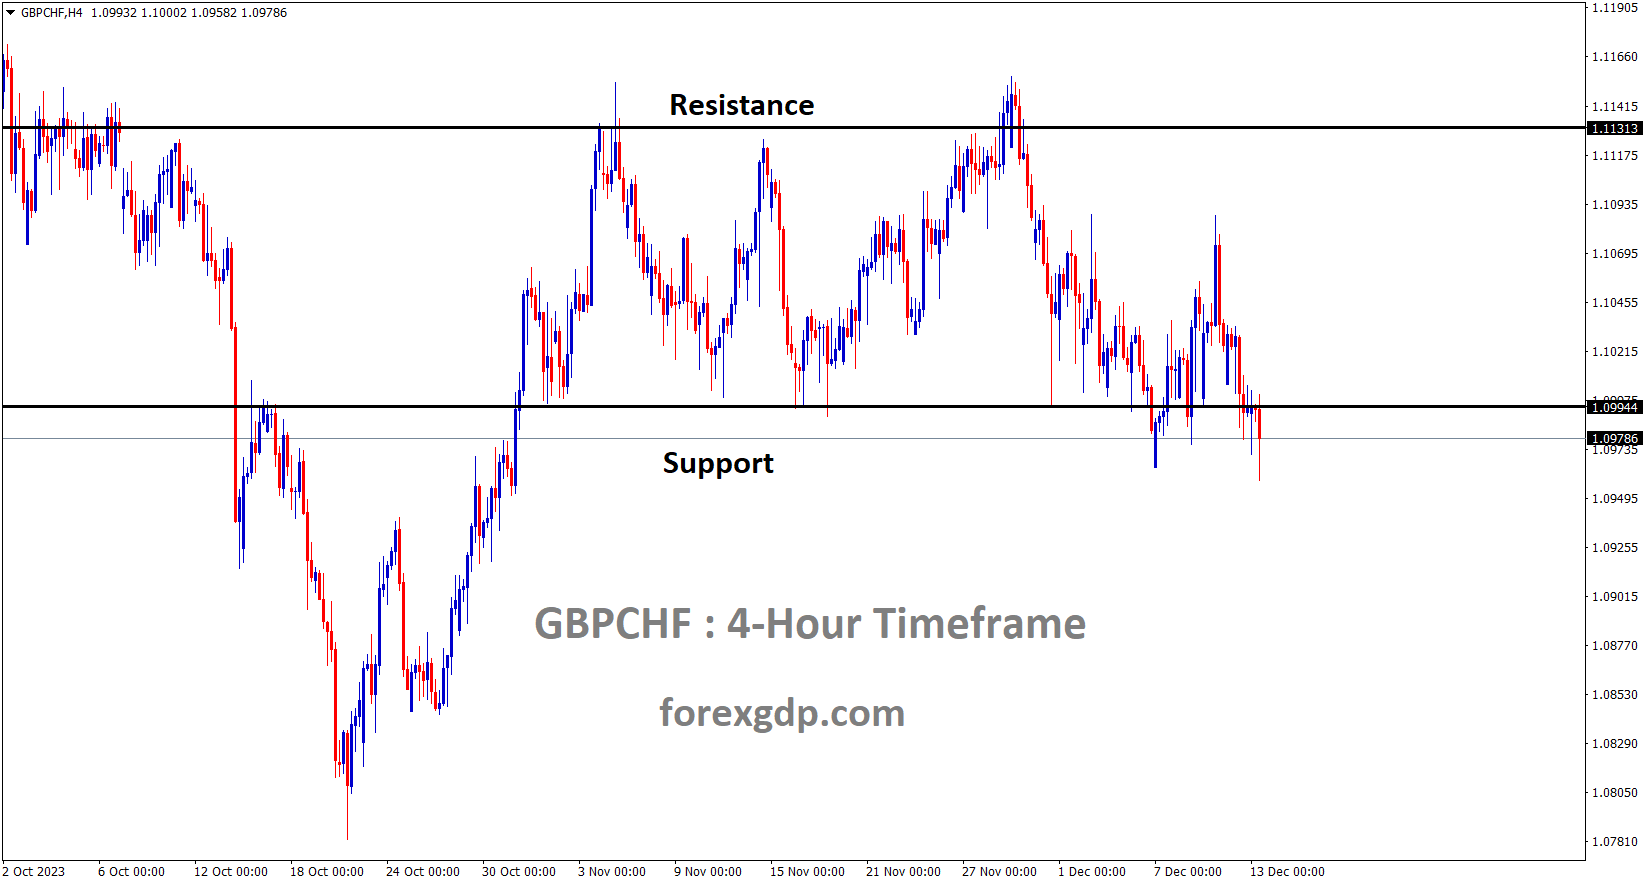 GBPCHF is moving in the Box pattern and the market has reached the support area of the pattern